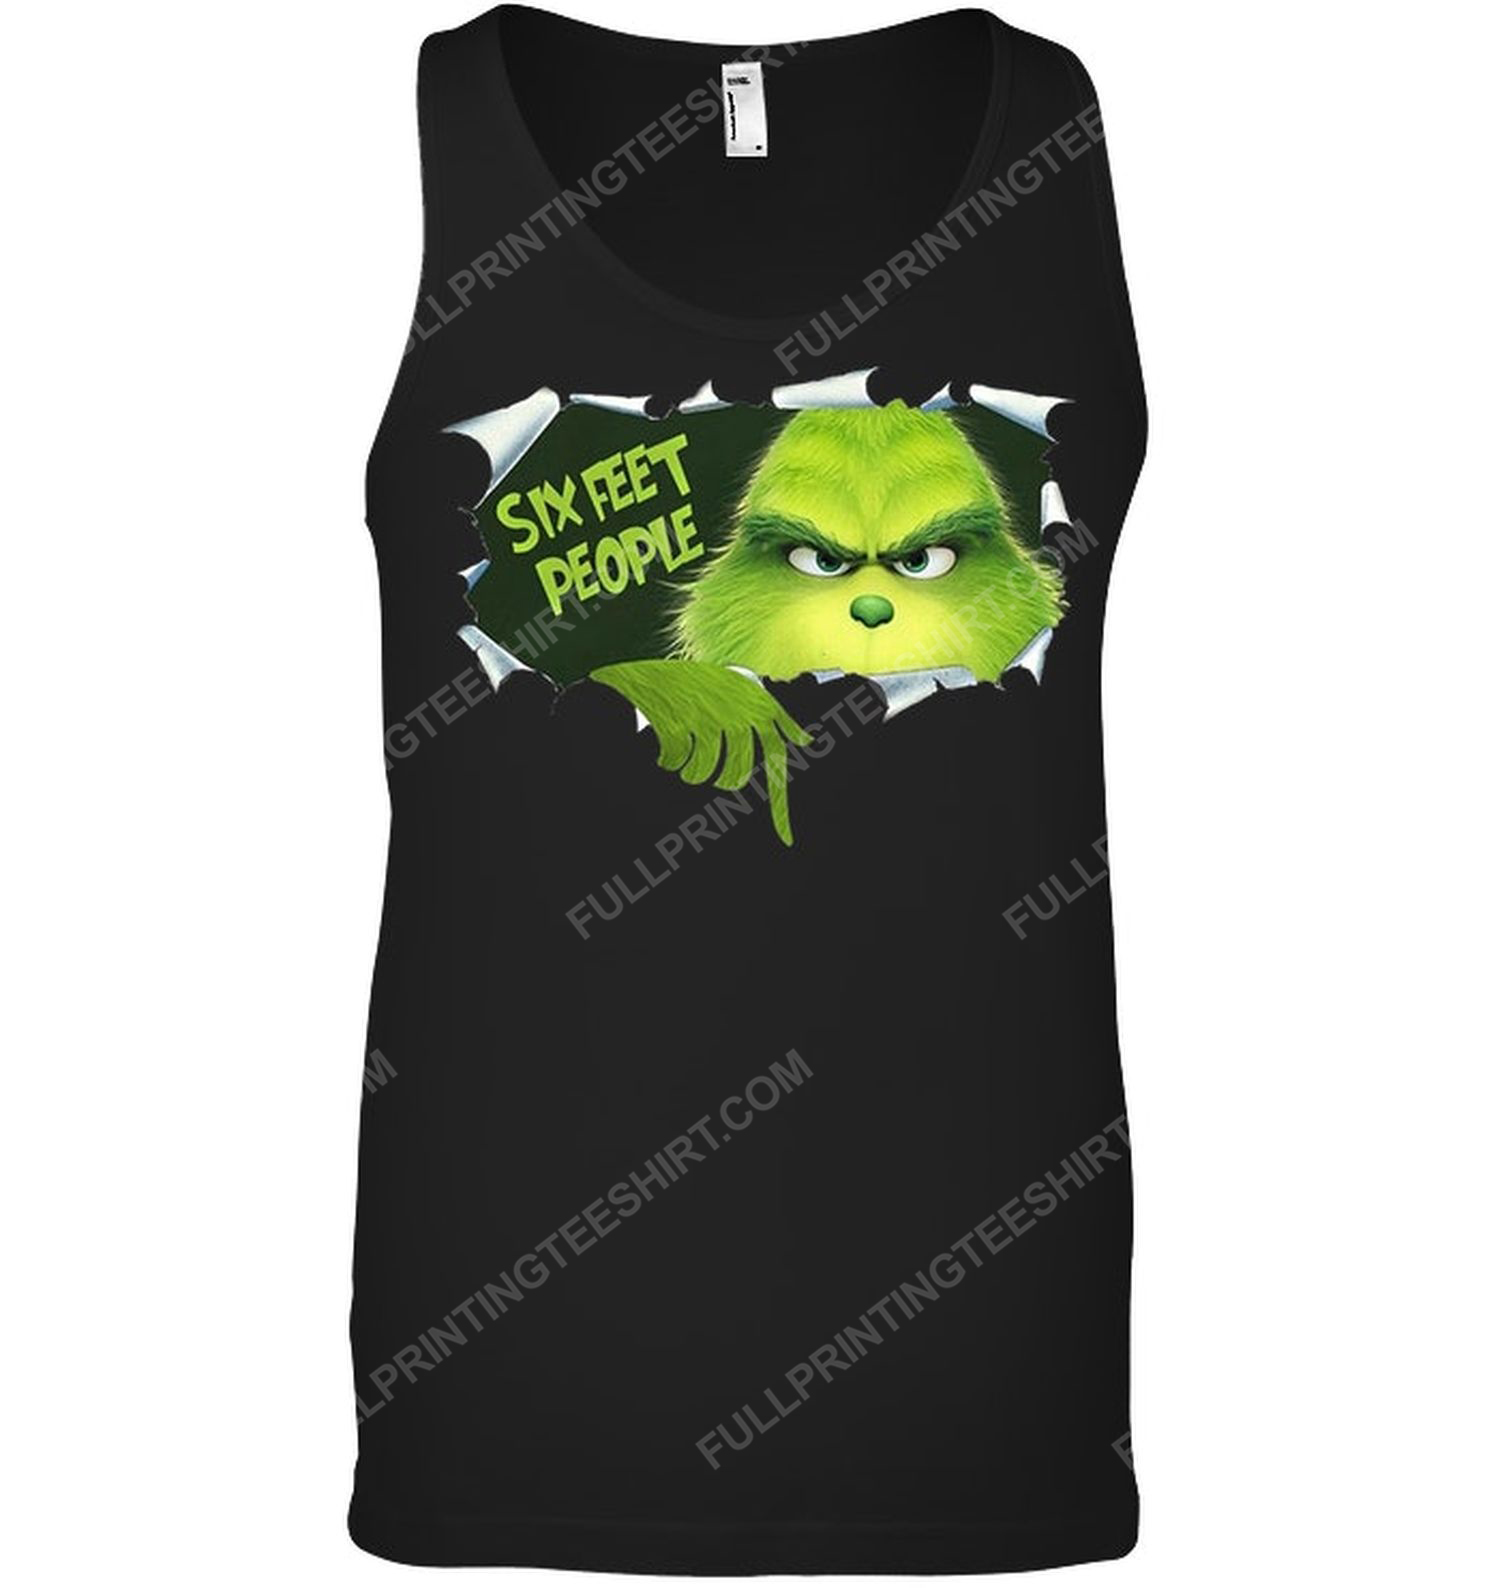 The grinch six feet people social distancing tank top